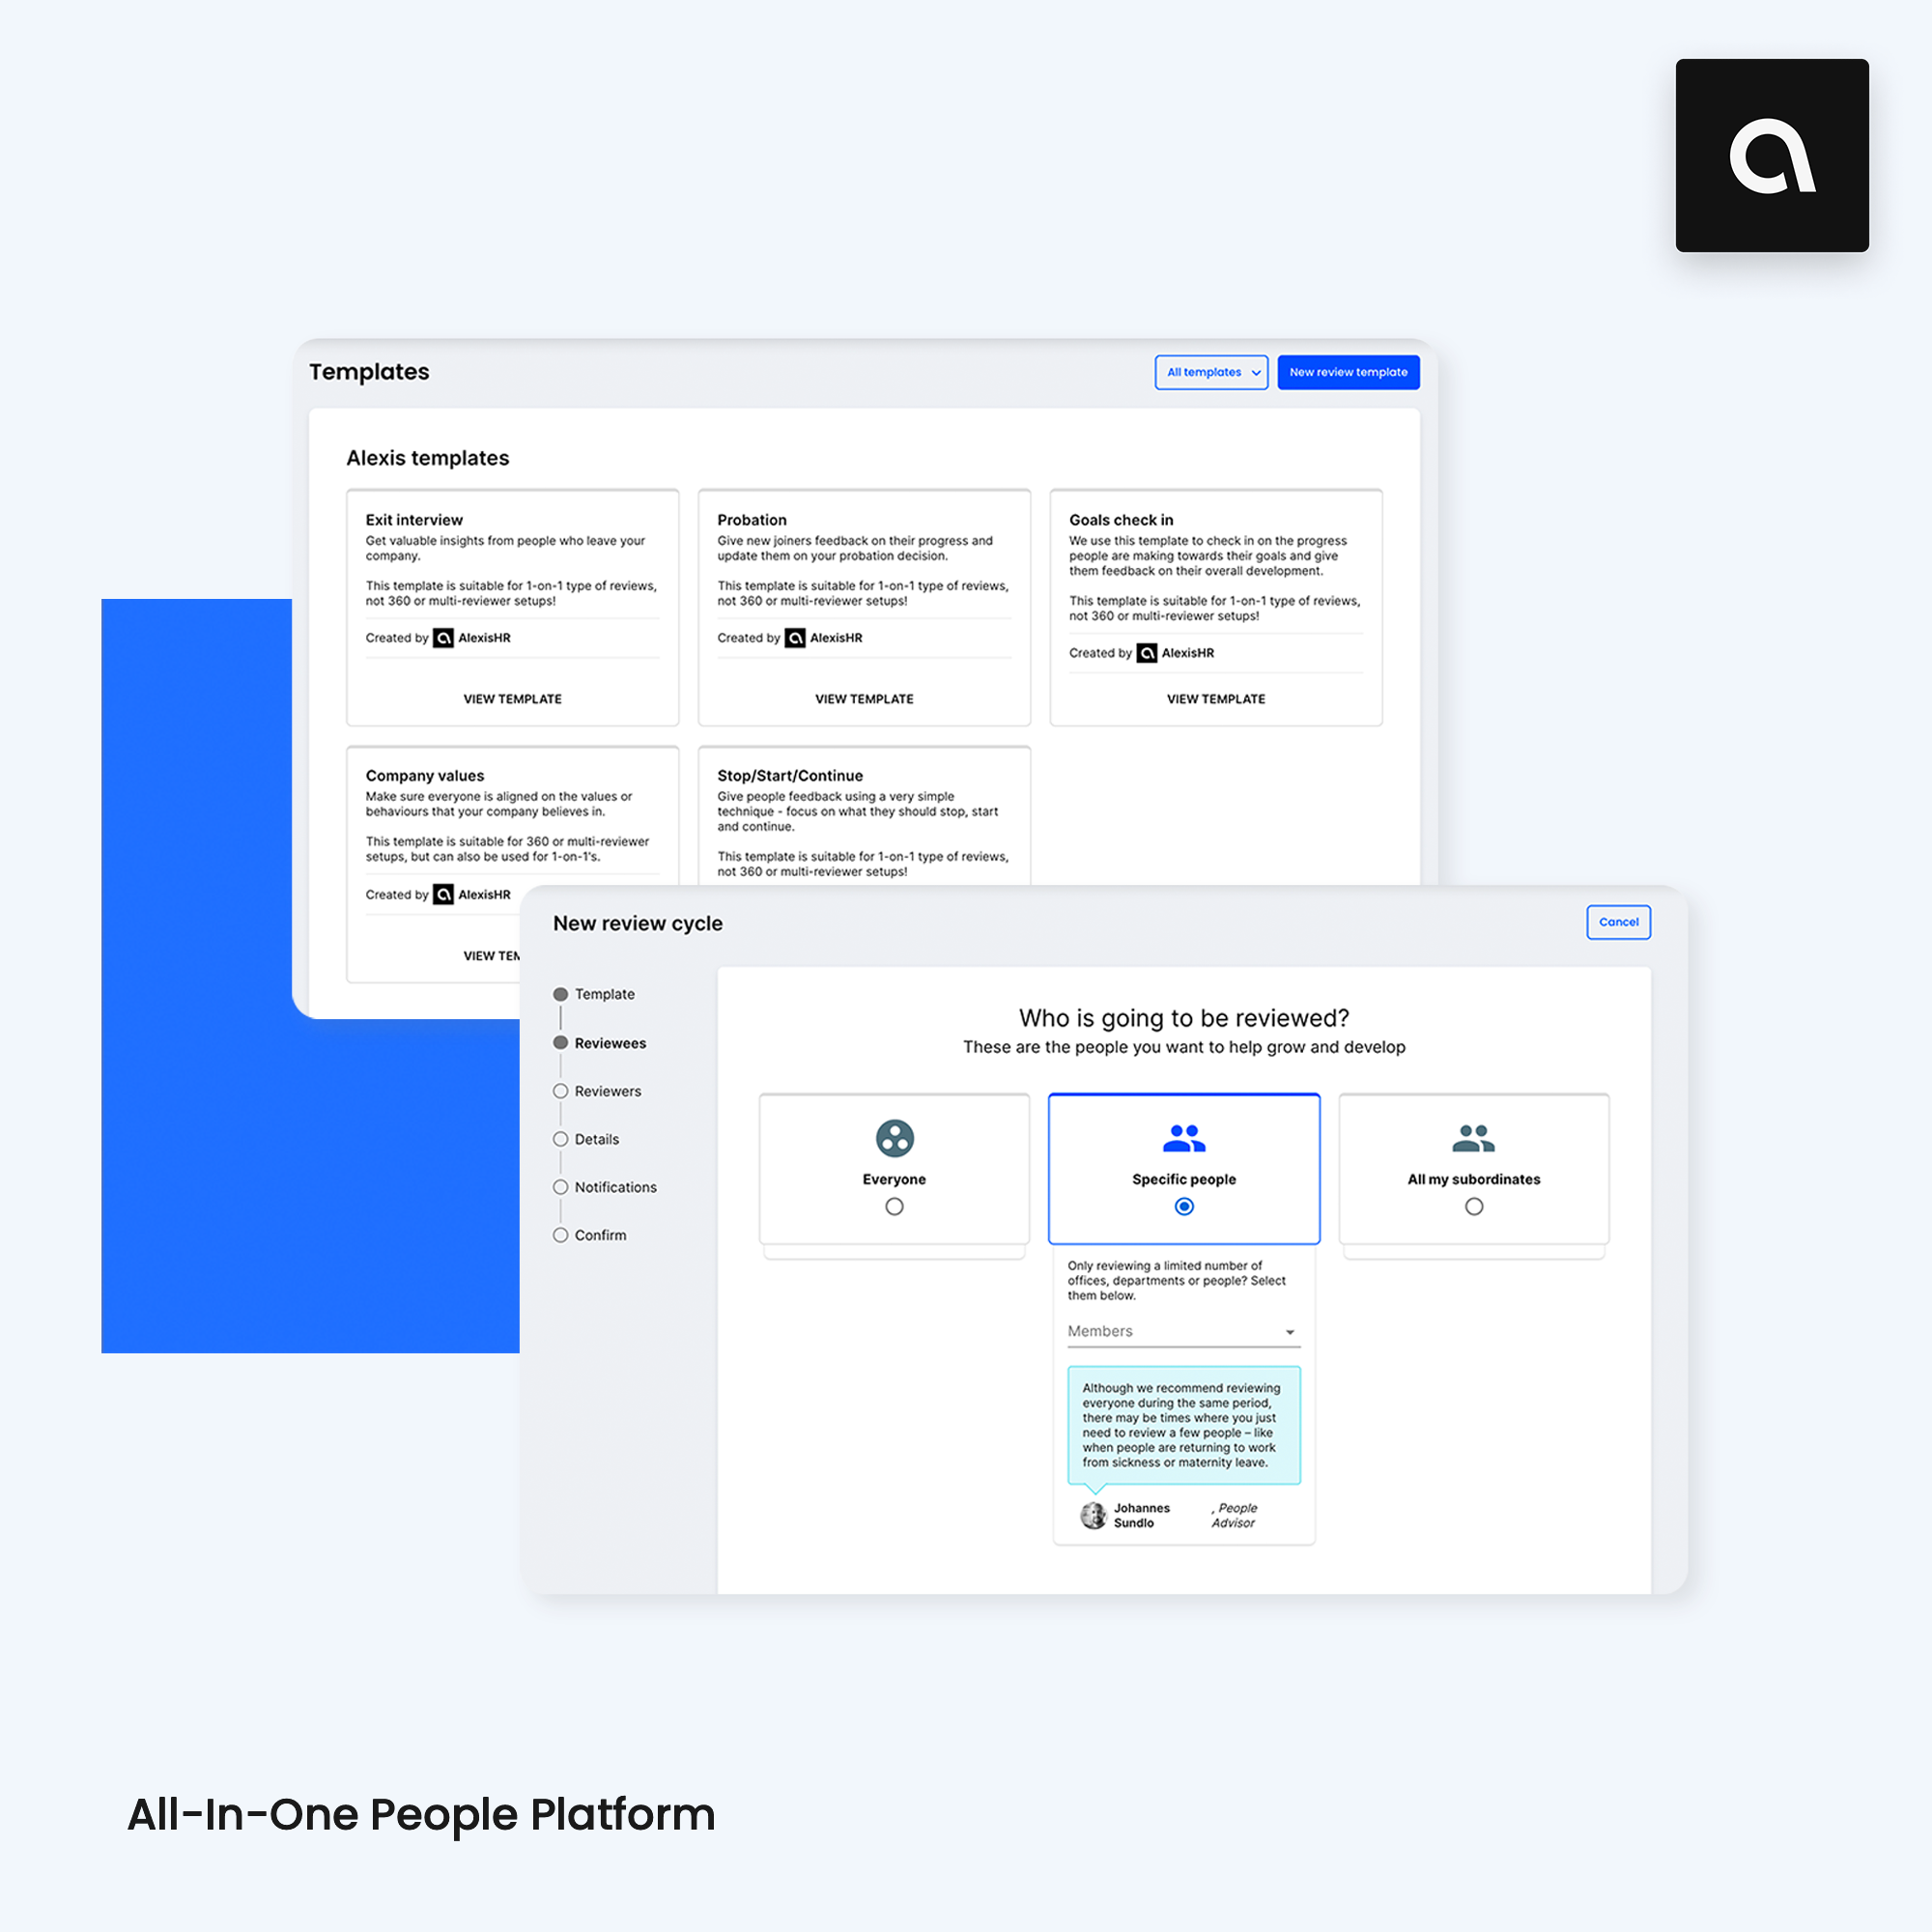 Enable professional growth and use custom templates with performing reviews. The platform offers many more features, book a free demo to learn more!